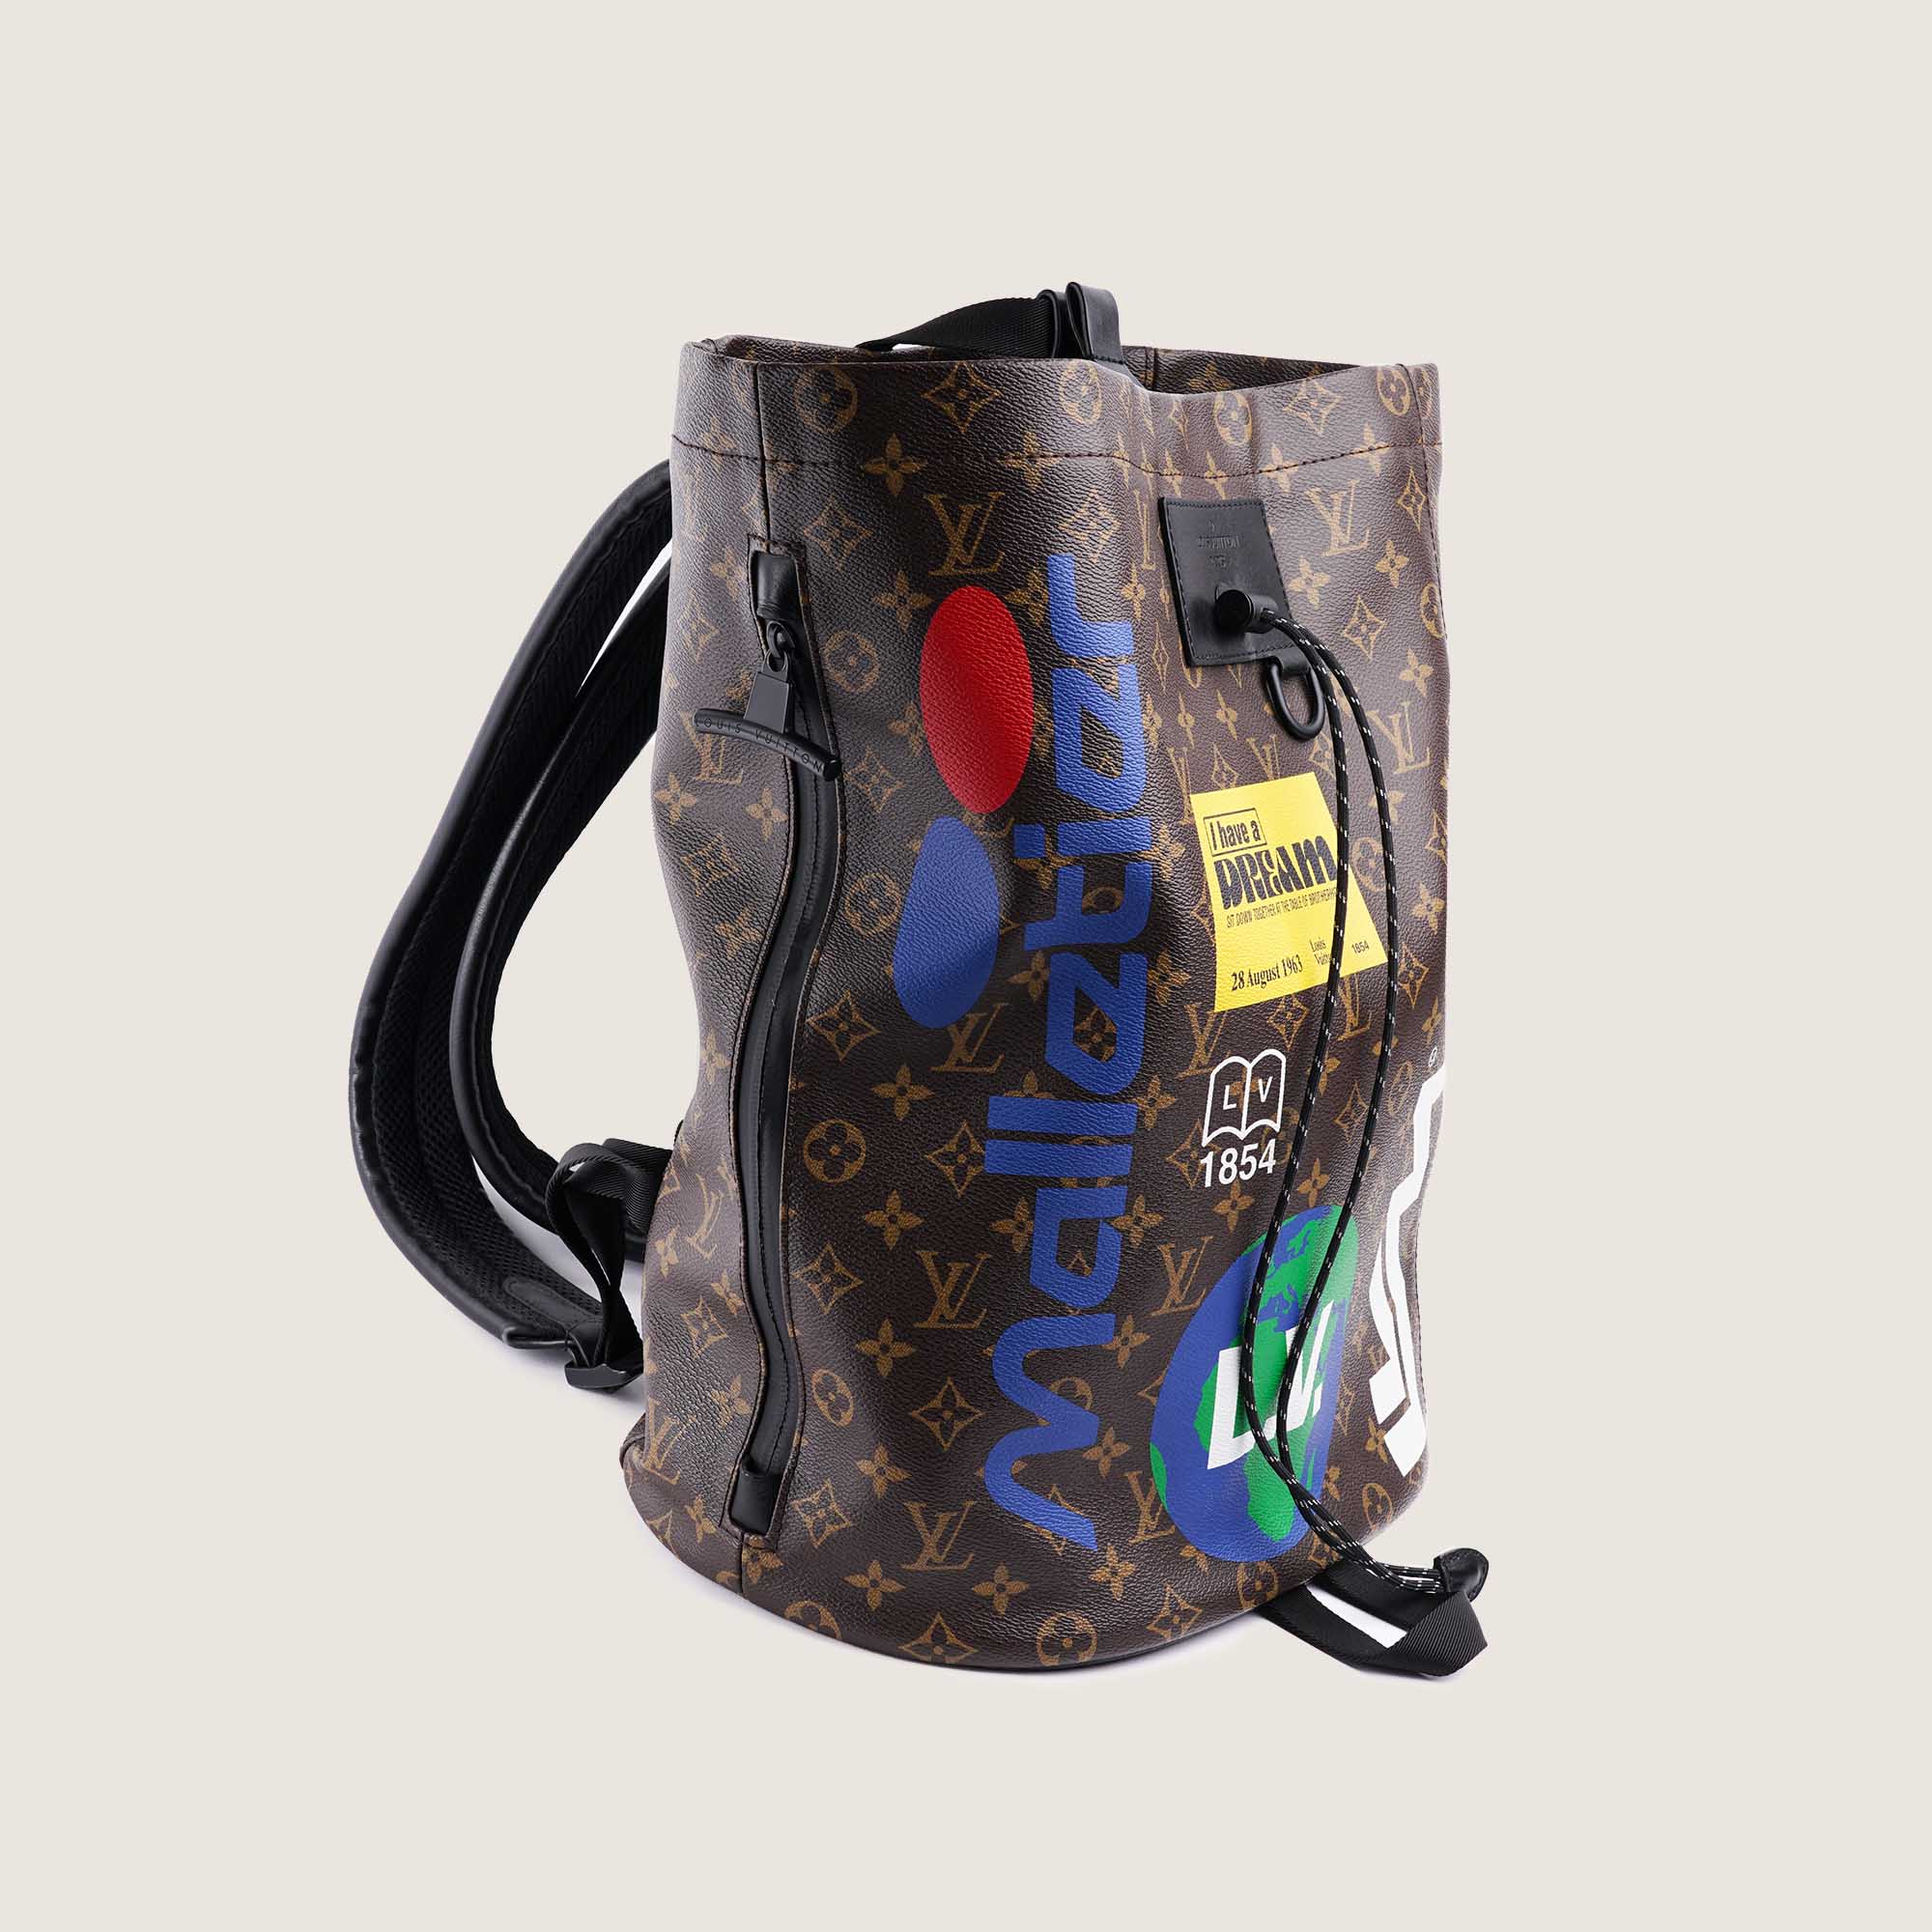 LTD-Editon Chalk Backpack - LOUIS VUITTON - Affordable Luxury image